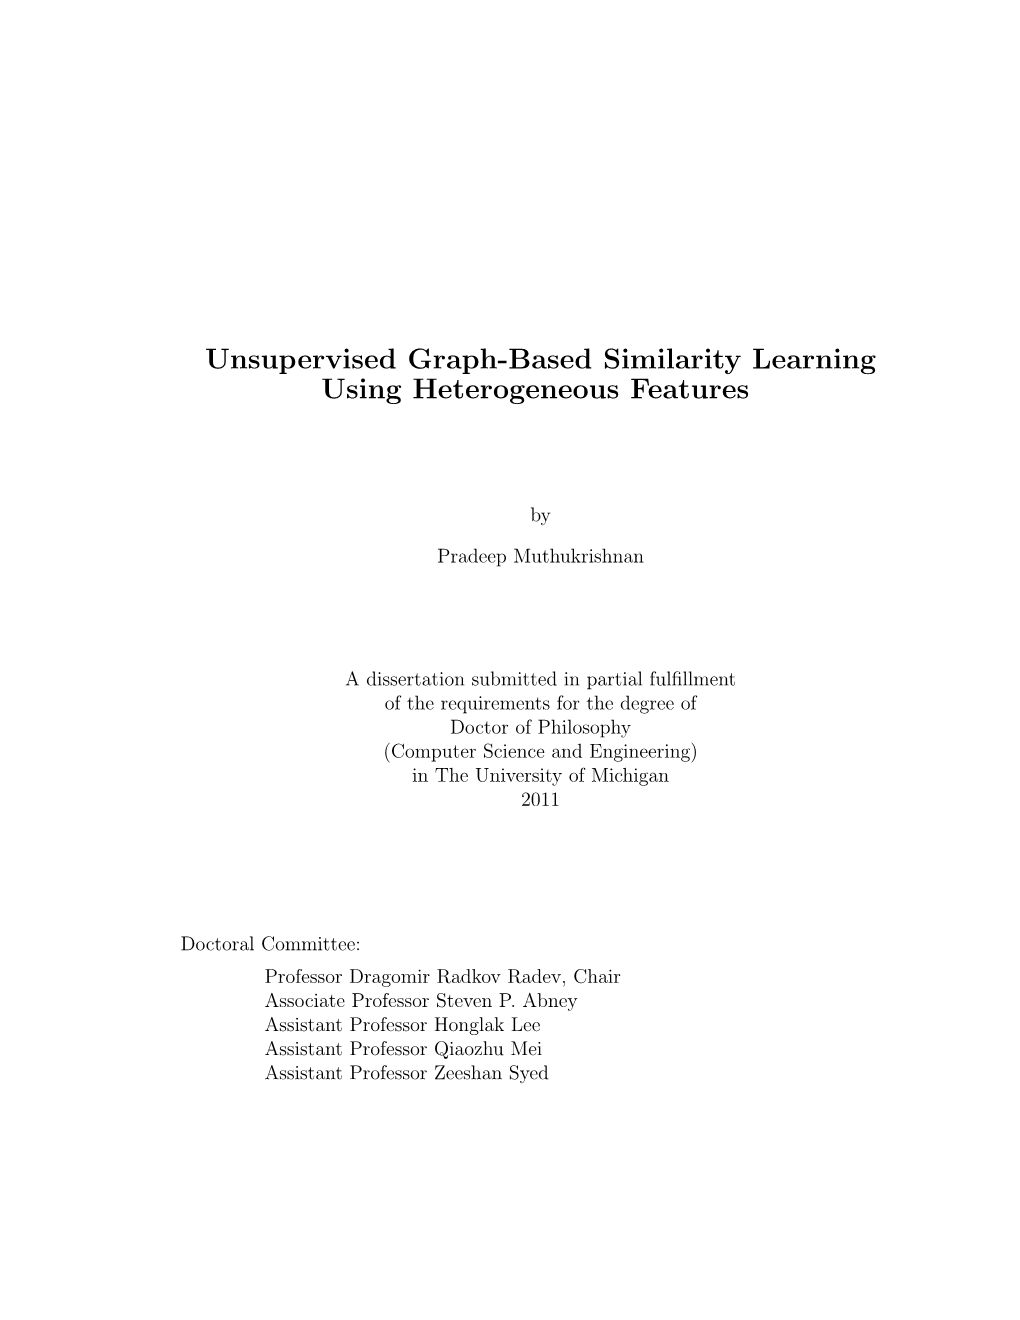 Unsupervised Graph-Based Similarity Learning Using Heterogeneous Features